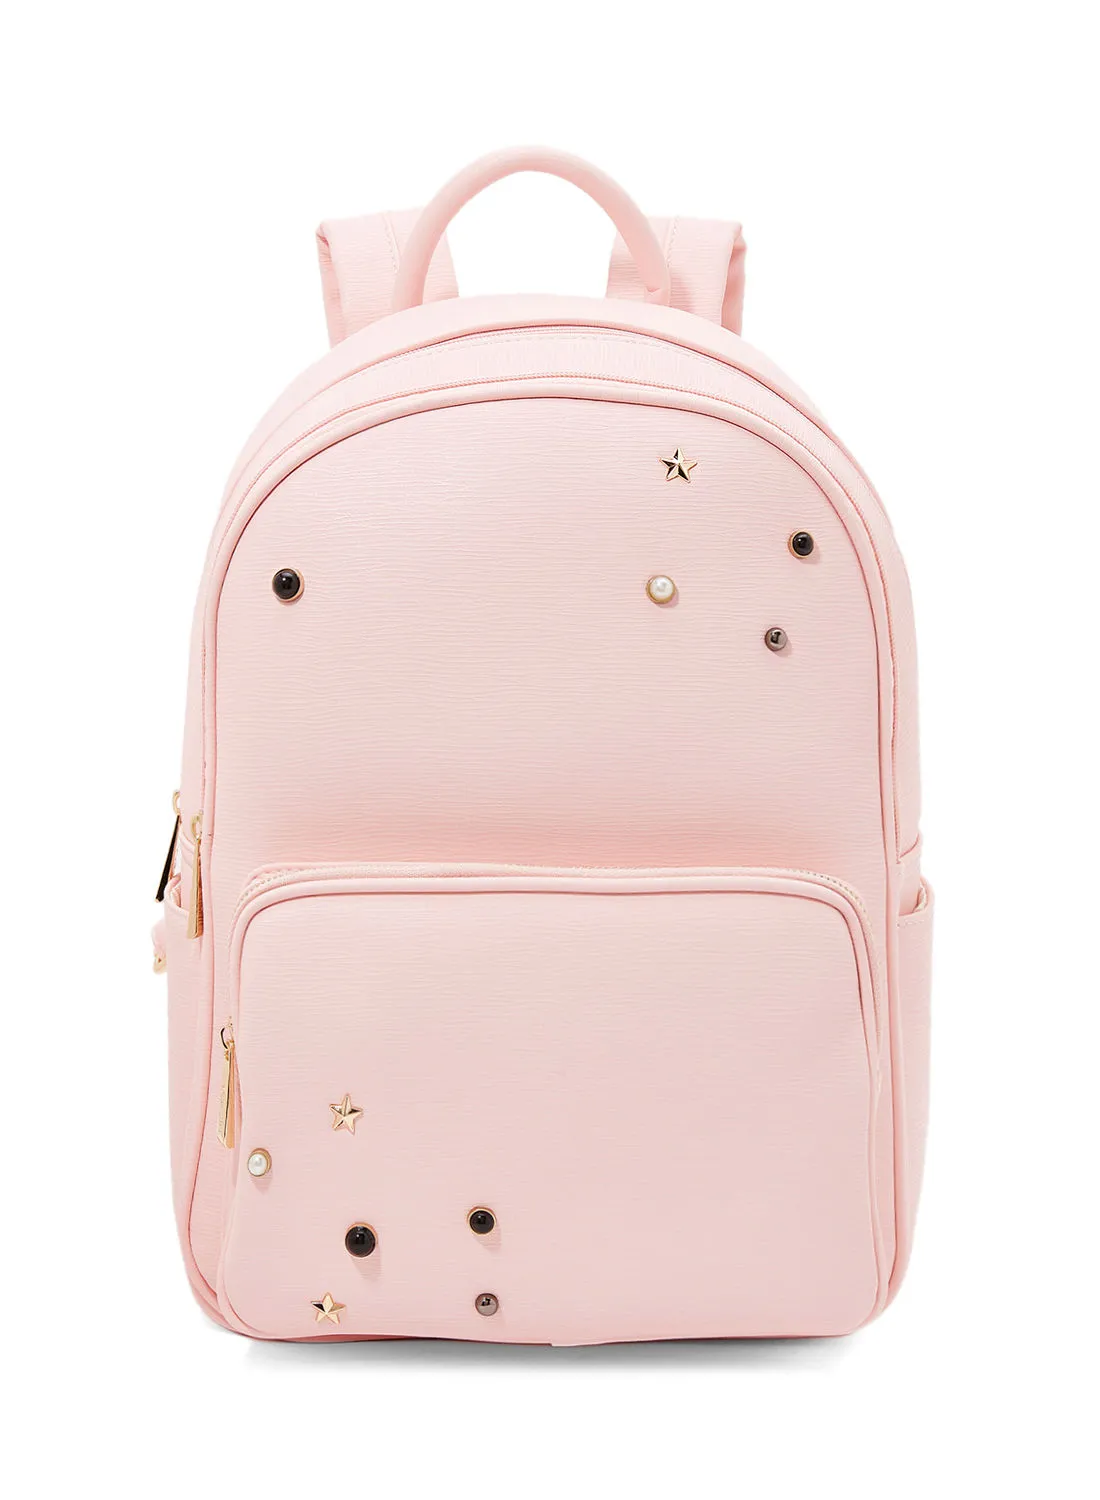 YUEJIN Faux Leather Backpack Pink